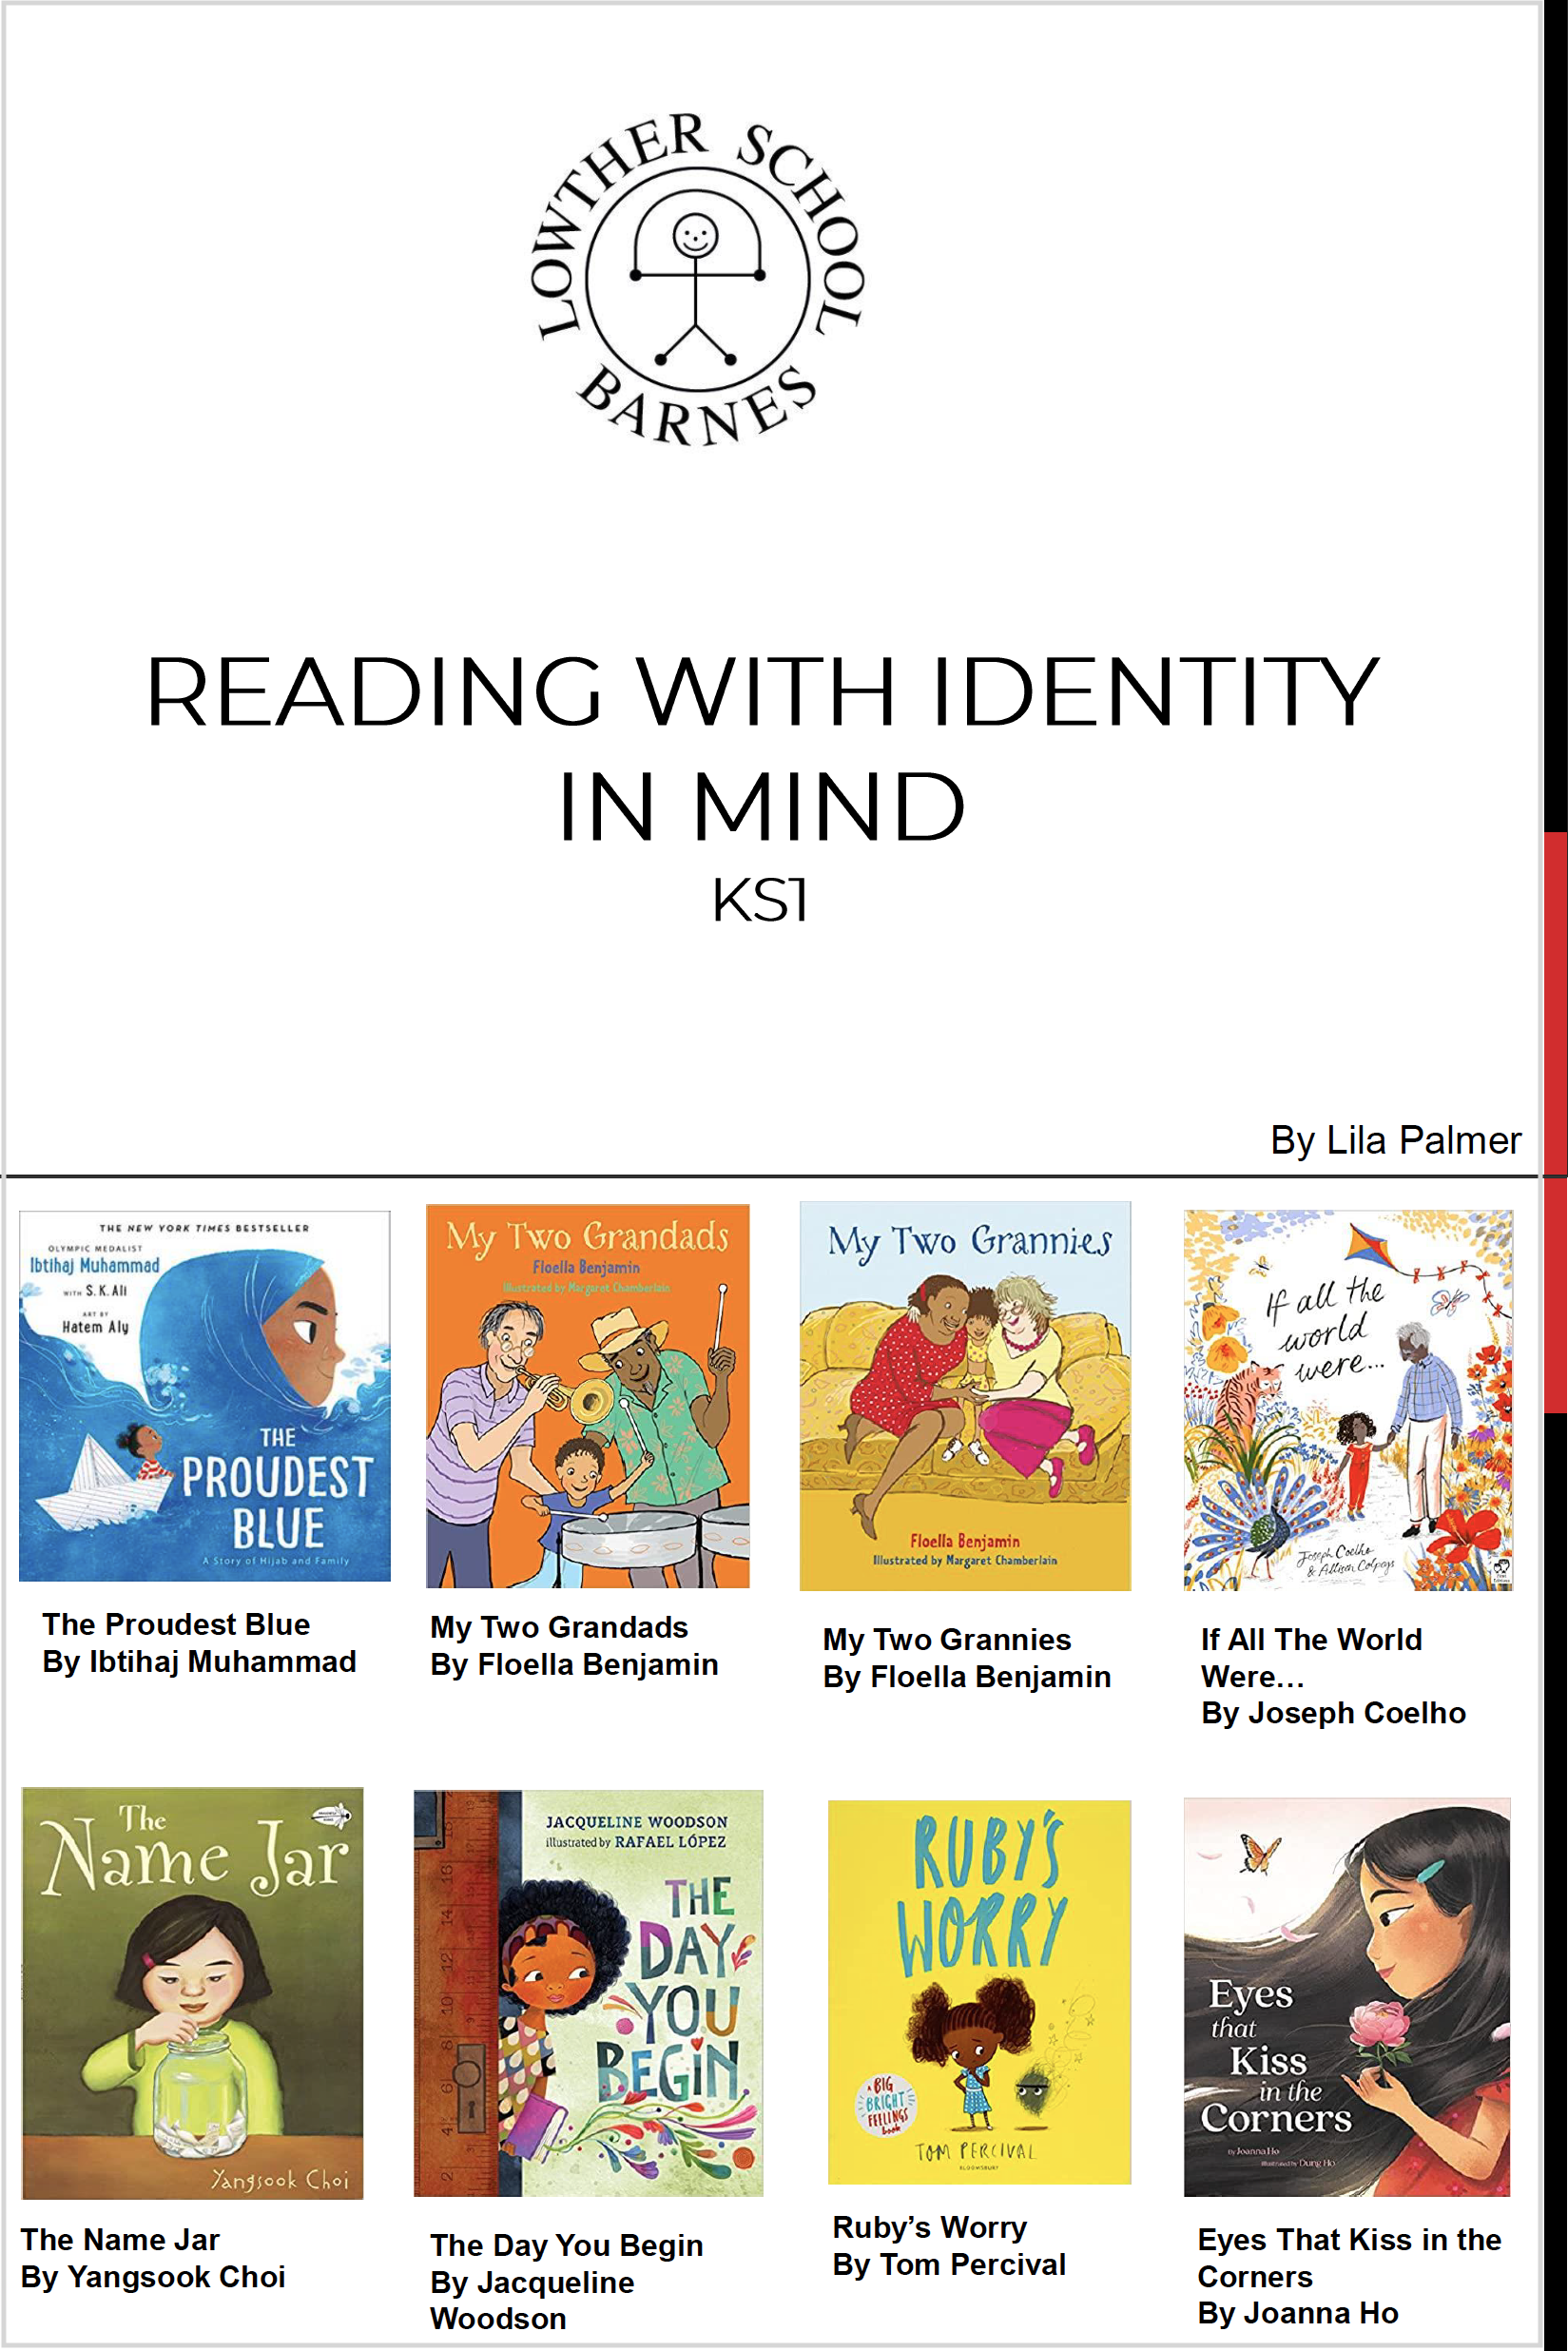 KS1 Reading with identity in mind PDF link